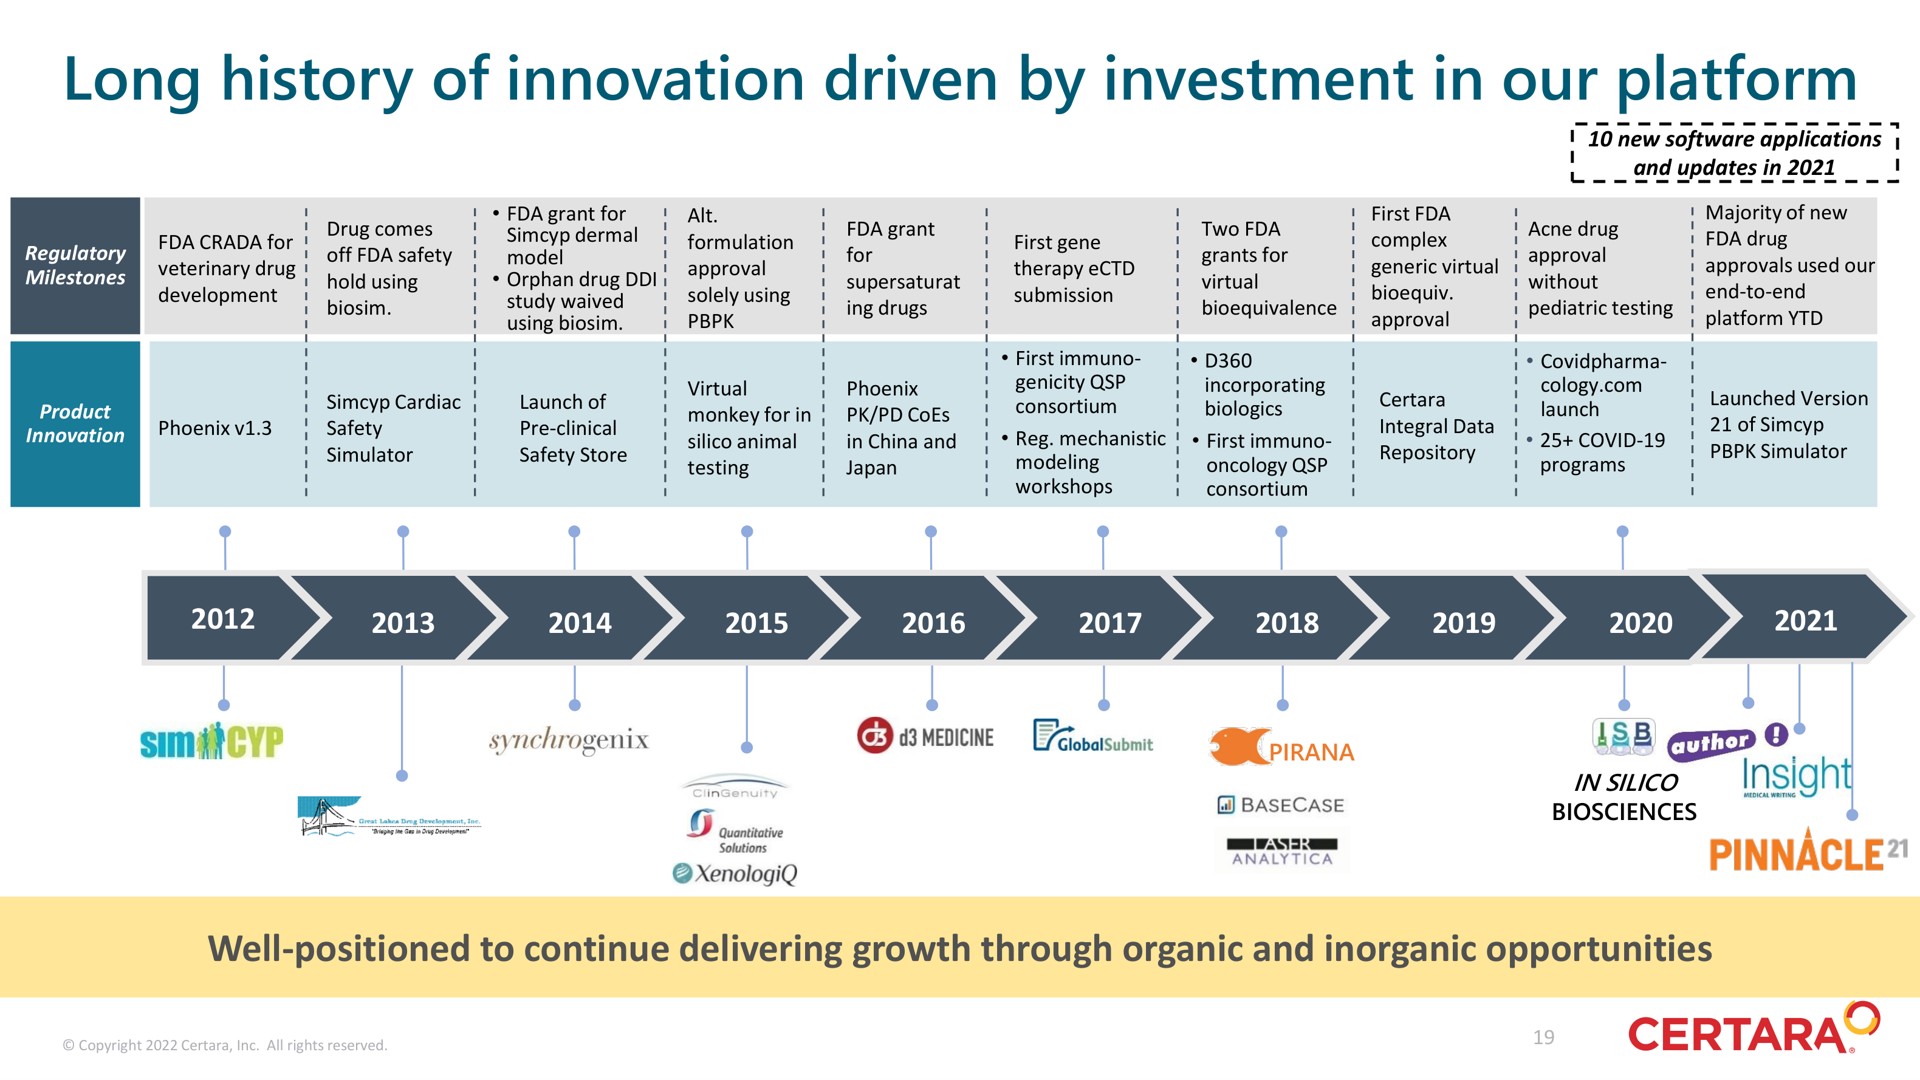 long history of innovation driven by investment in our platform | Certara